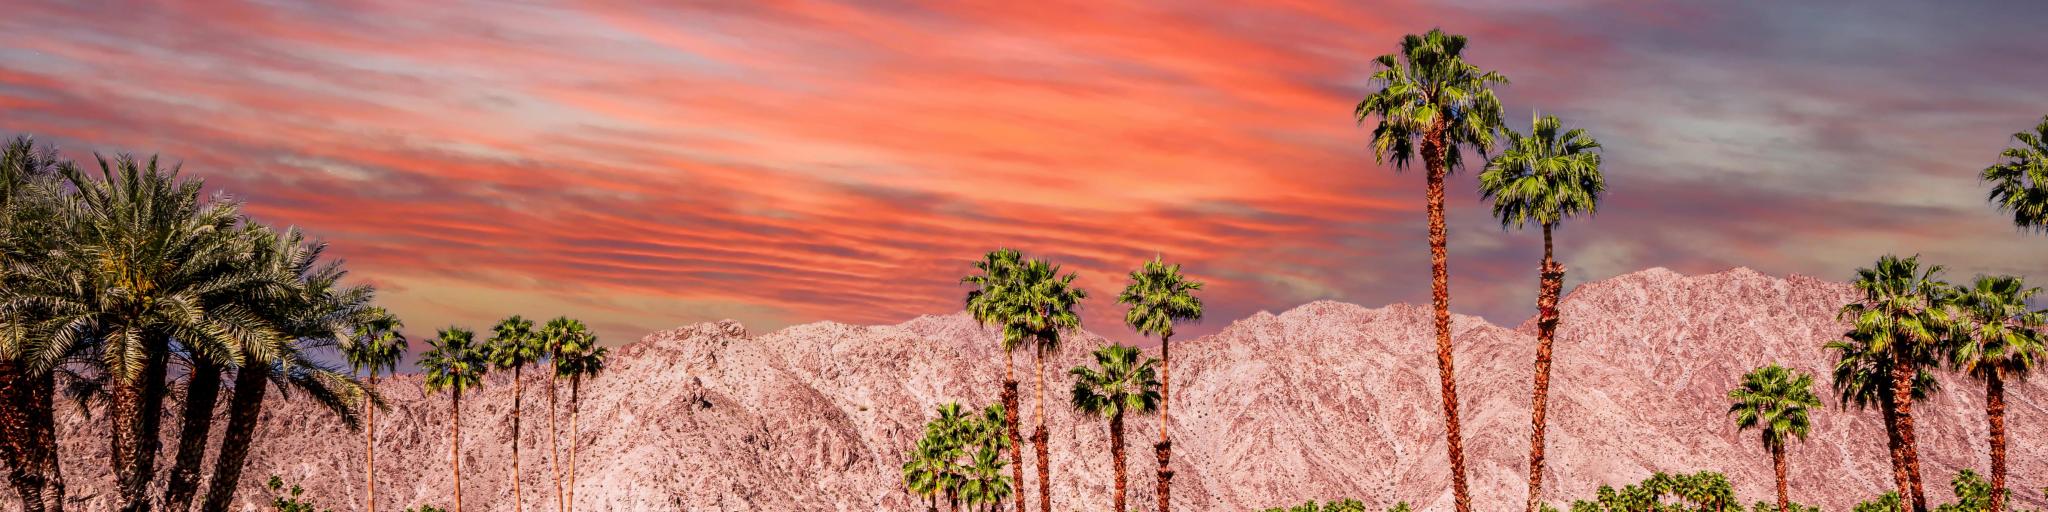 Pastel sunset above the San Jacinto Mountains, Palm Springs California with palm trees in the foregroun